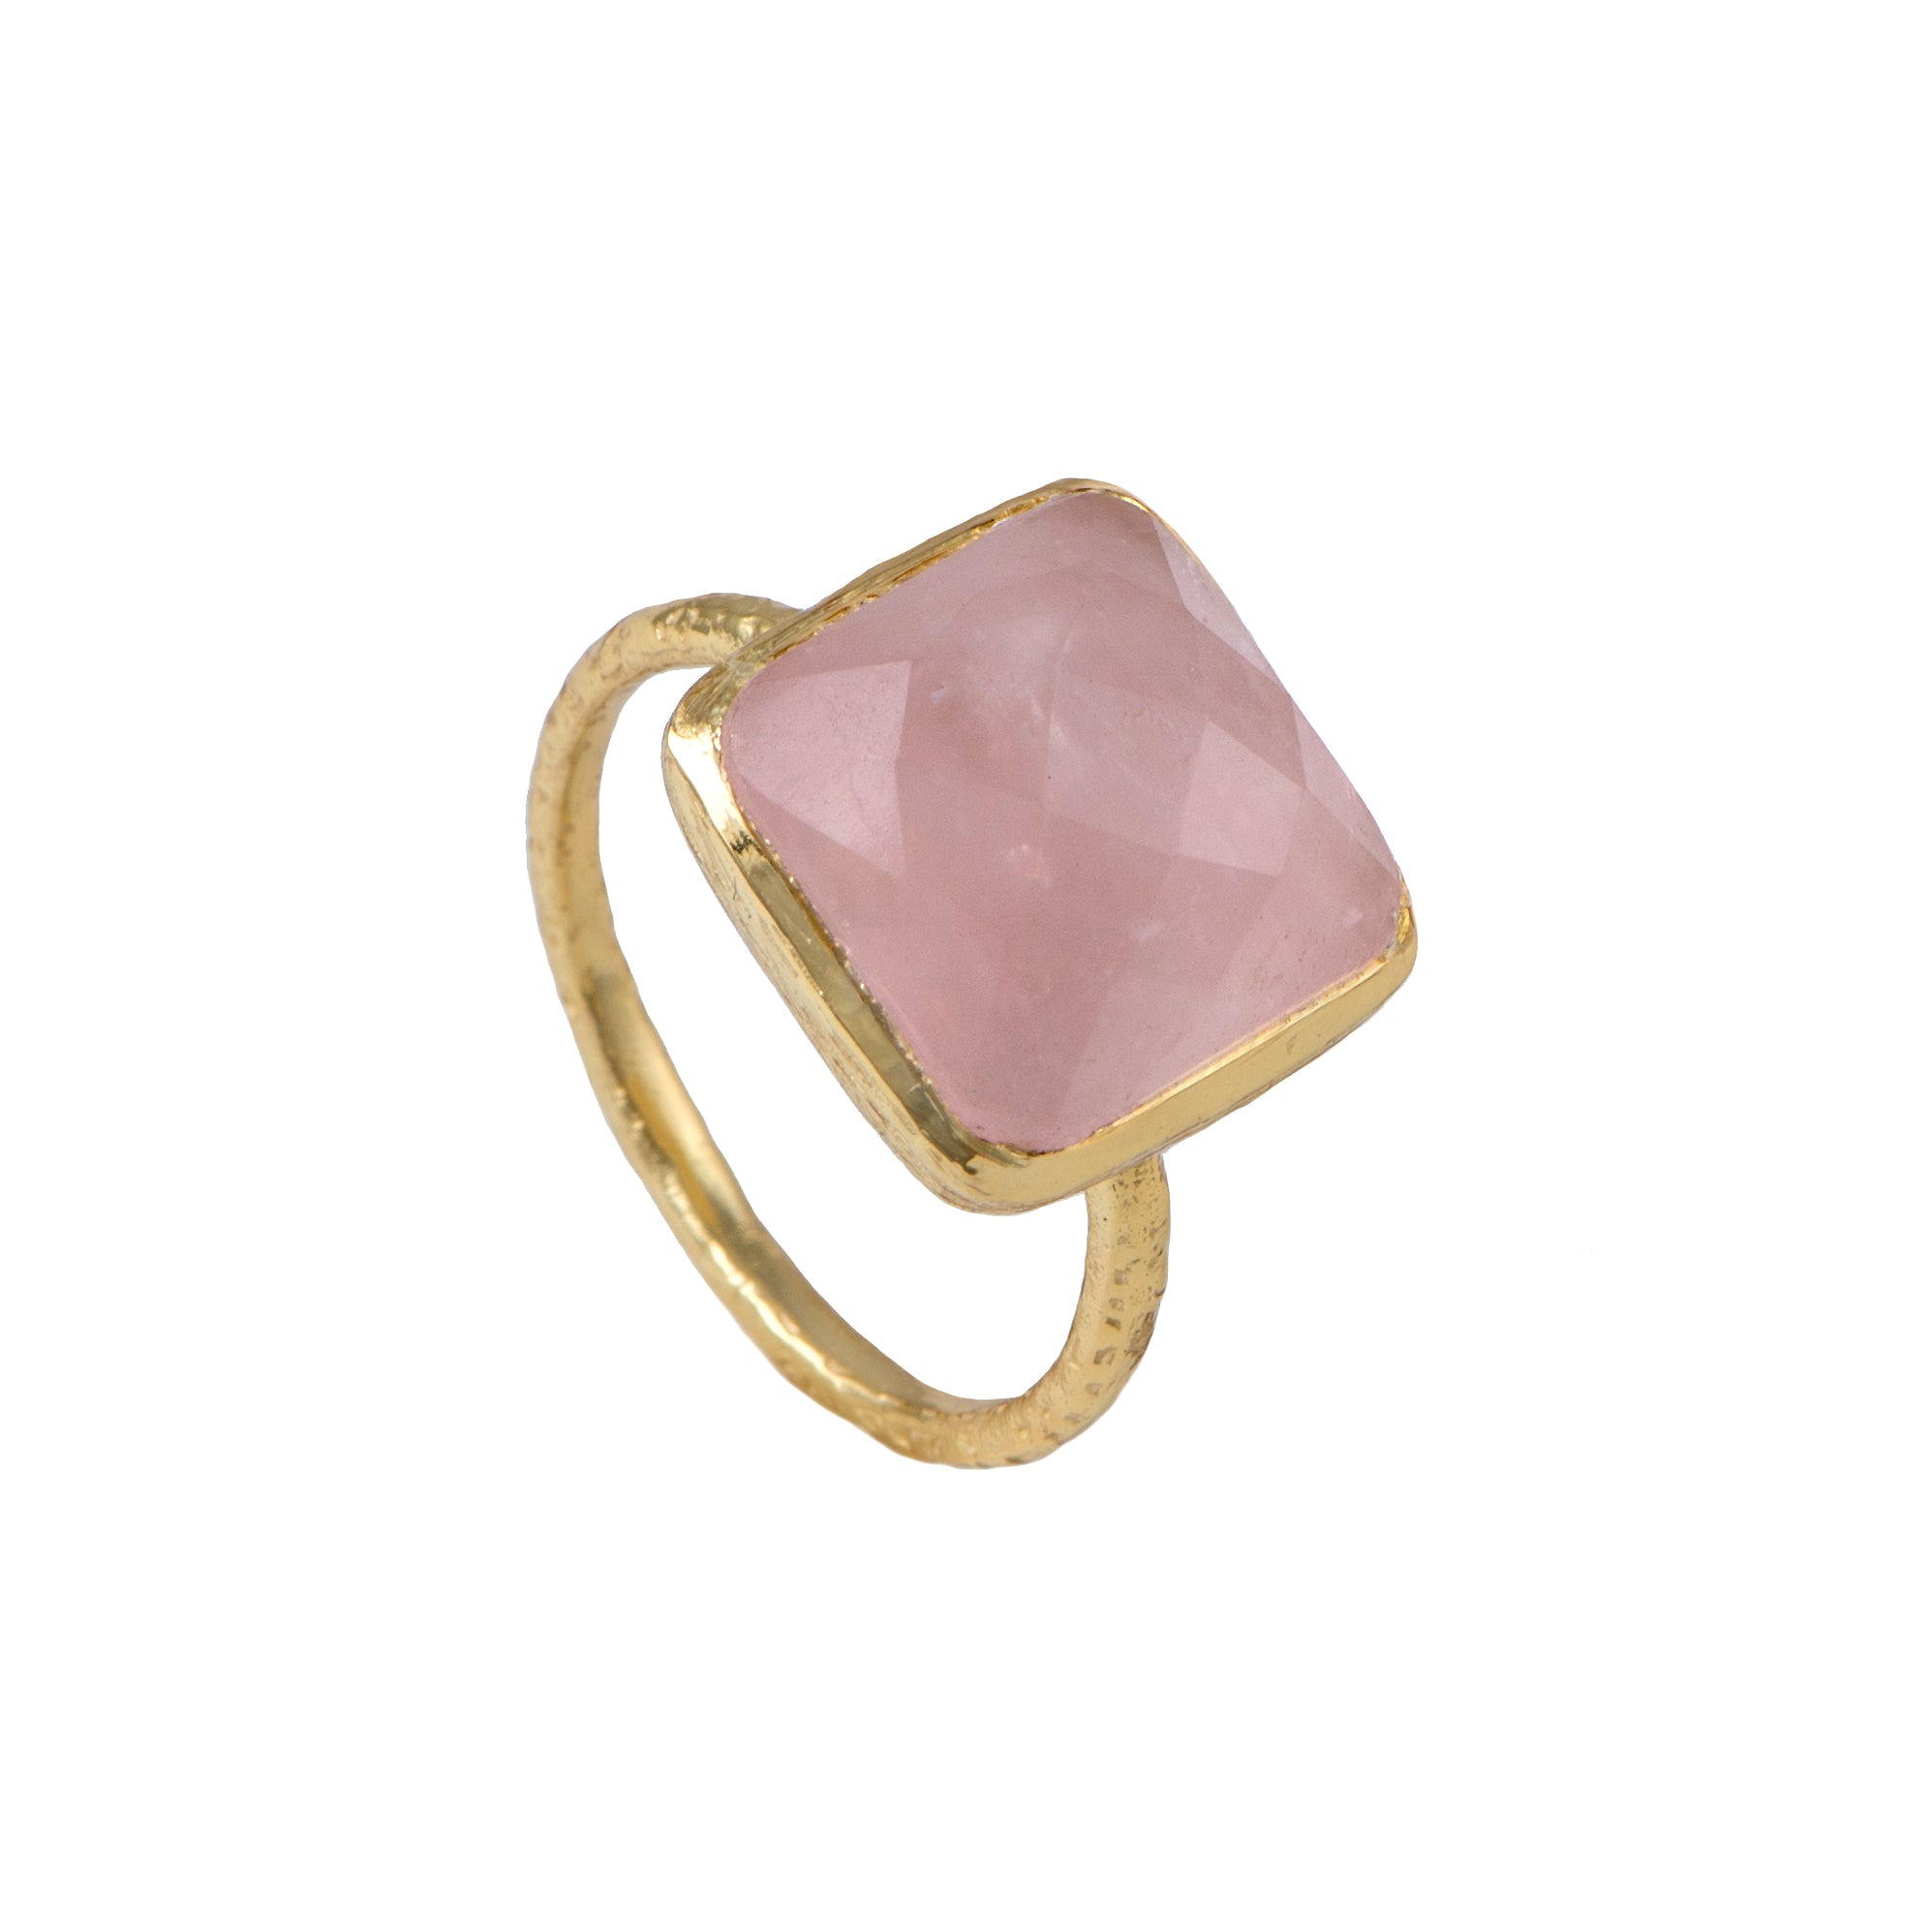 Gold Plated Silver Ring with Square Semiprecious Stone - Rose Quartz